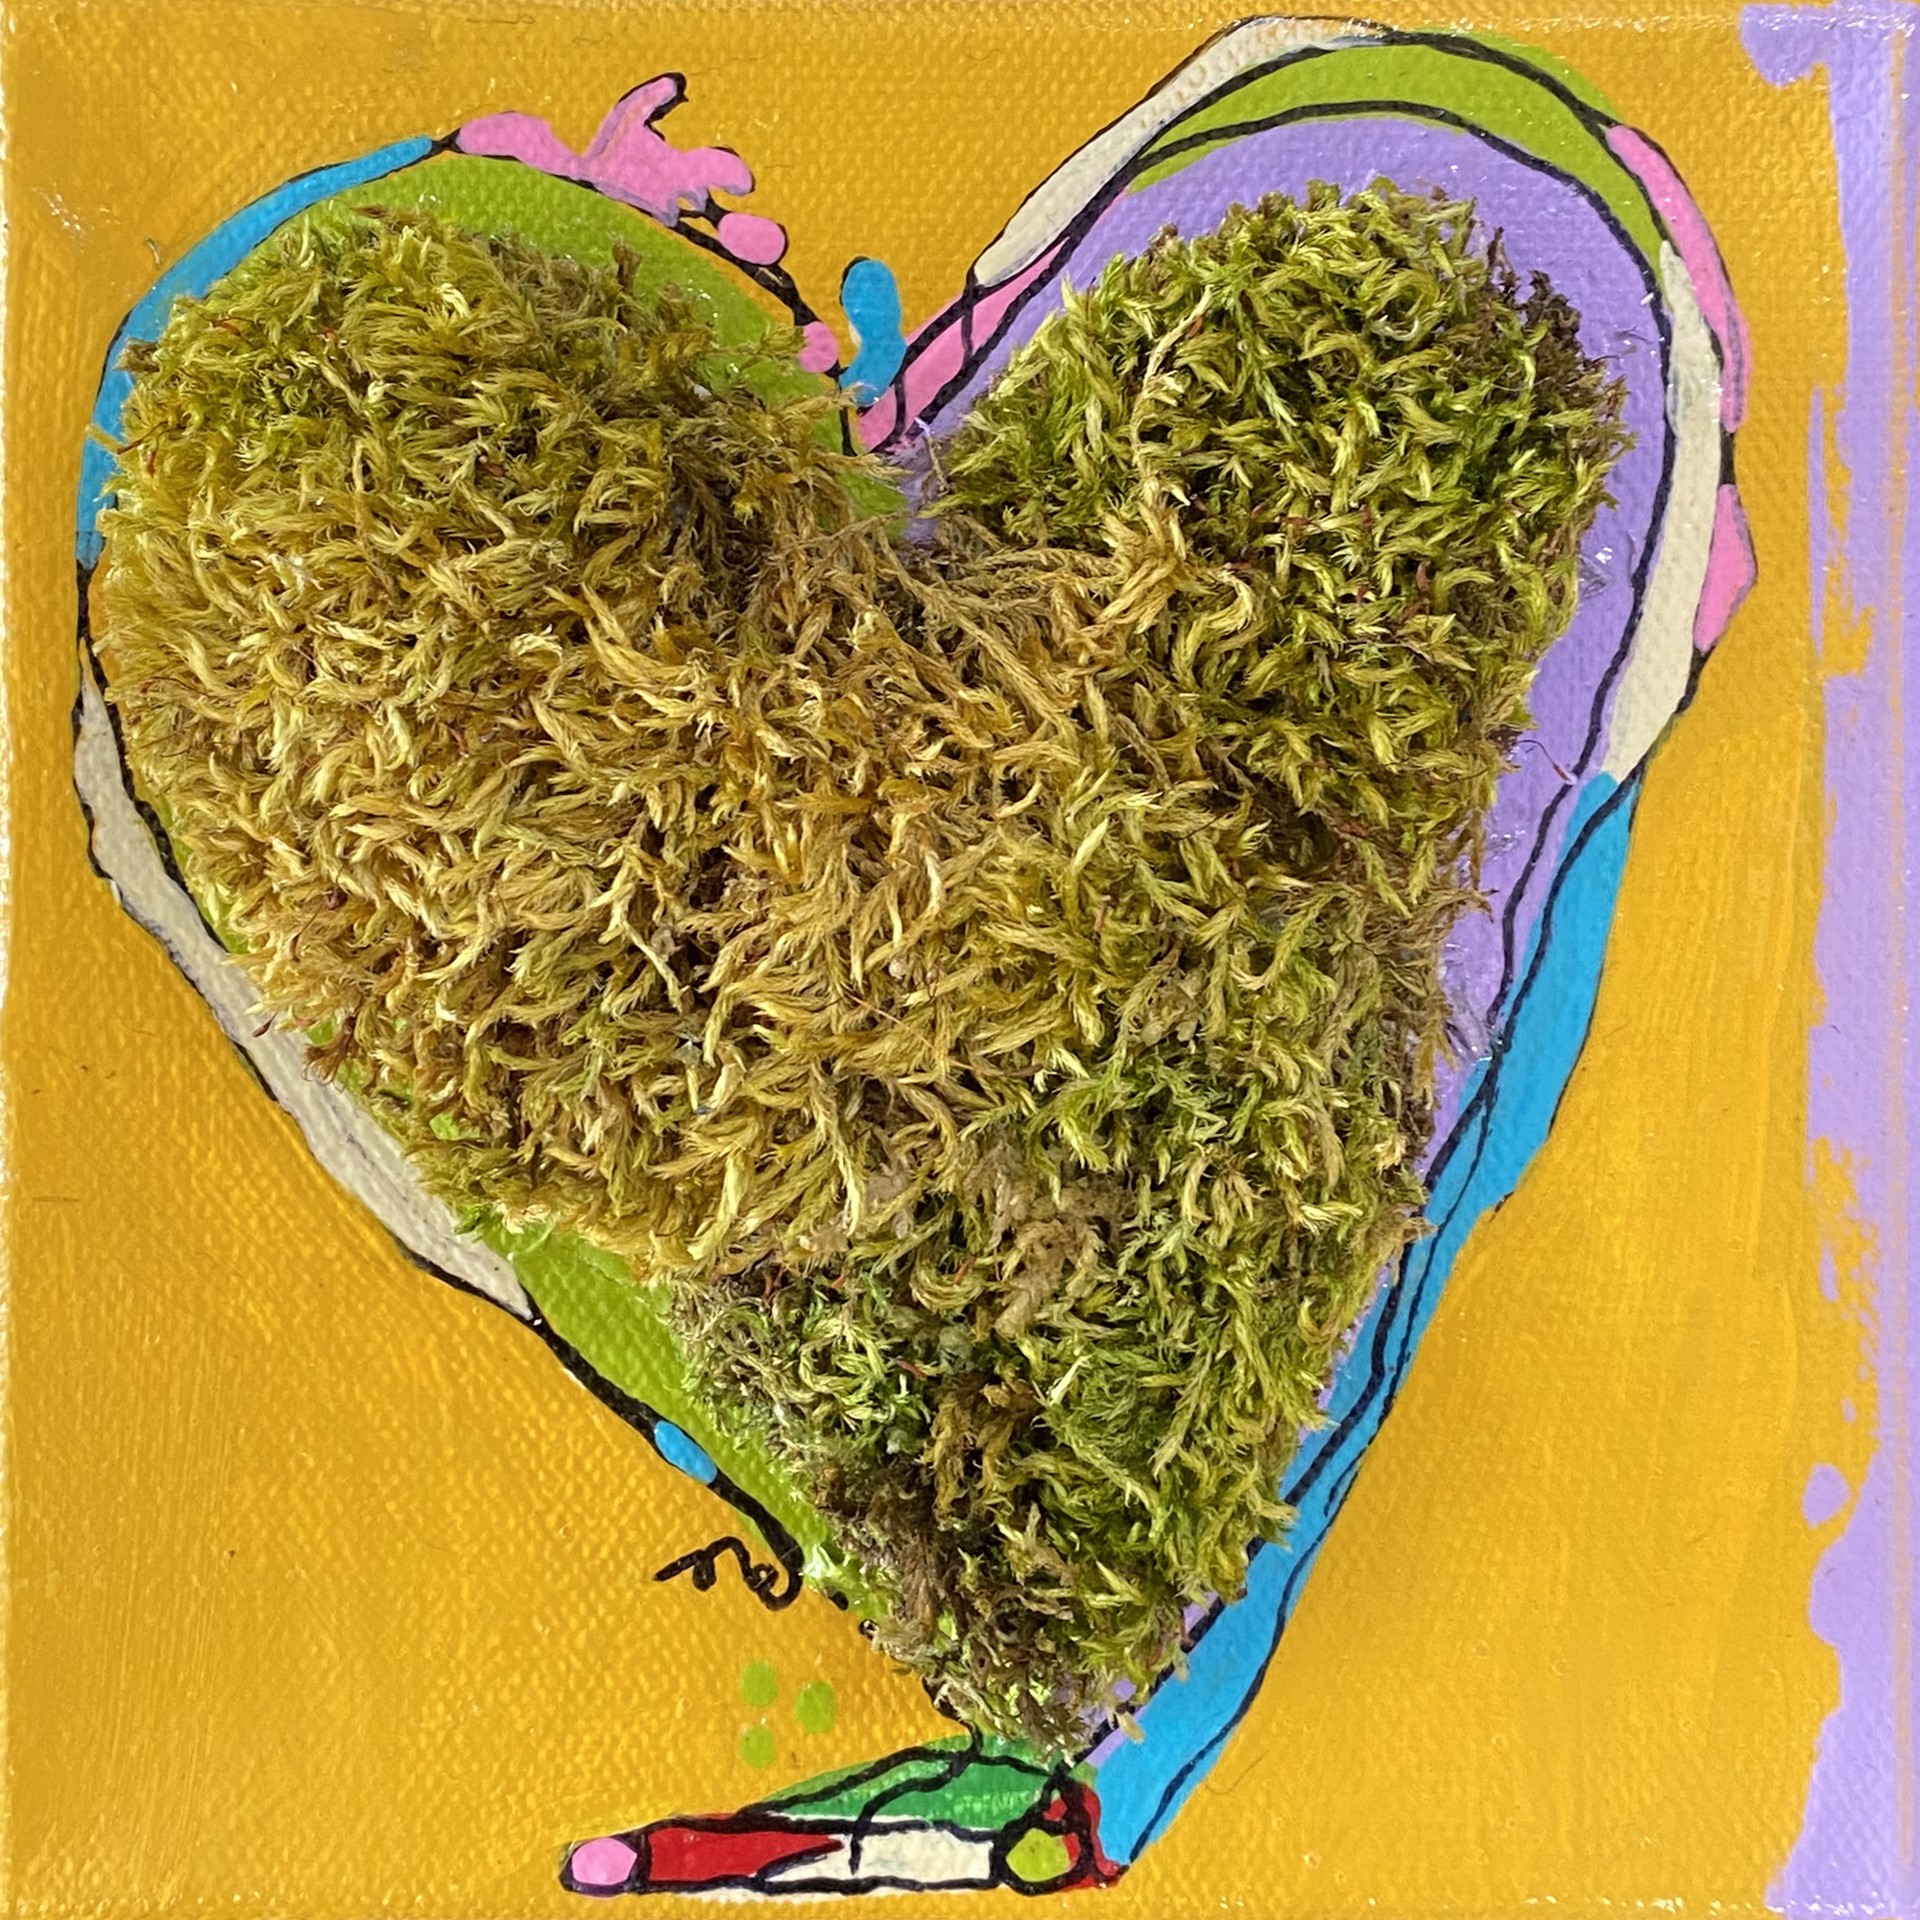 Mossy Hearts 2 by Lyndell Palermo